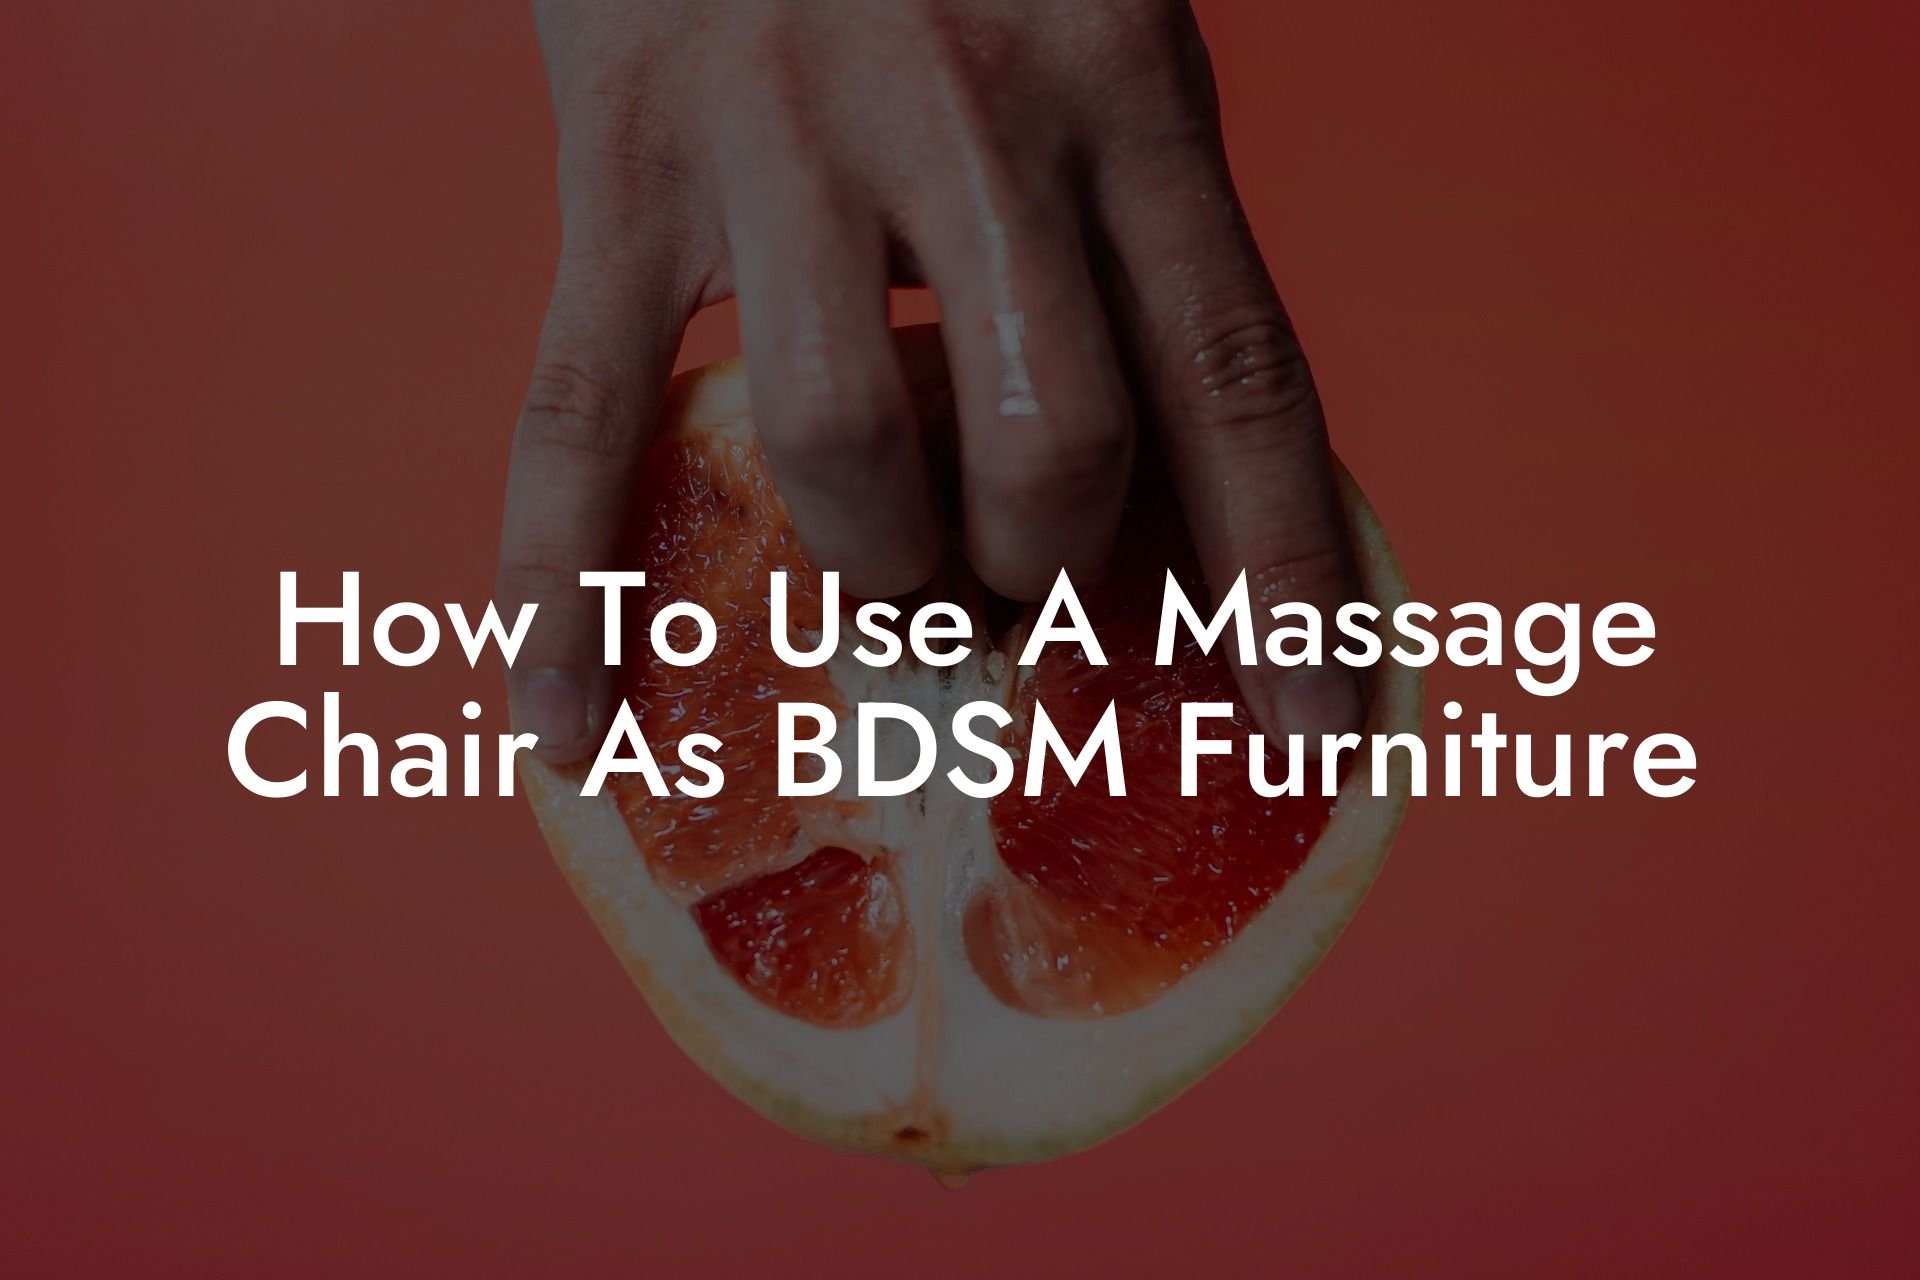 How To Use A Massage Chair As BDSM Furniture